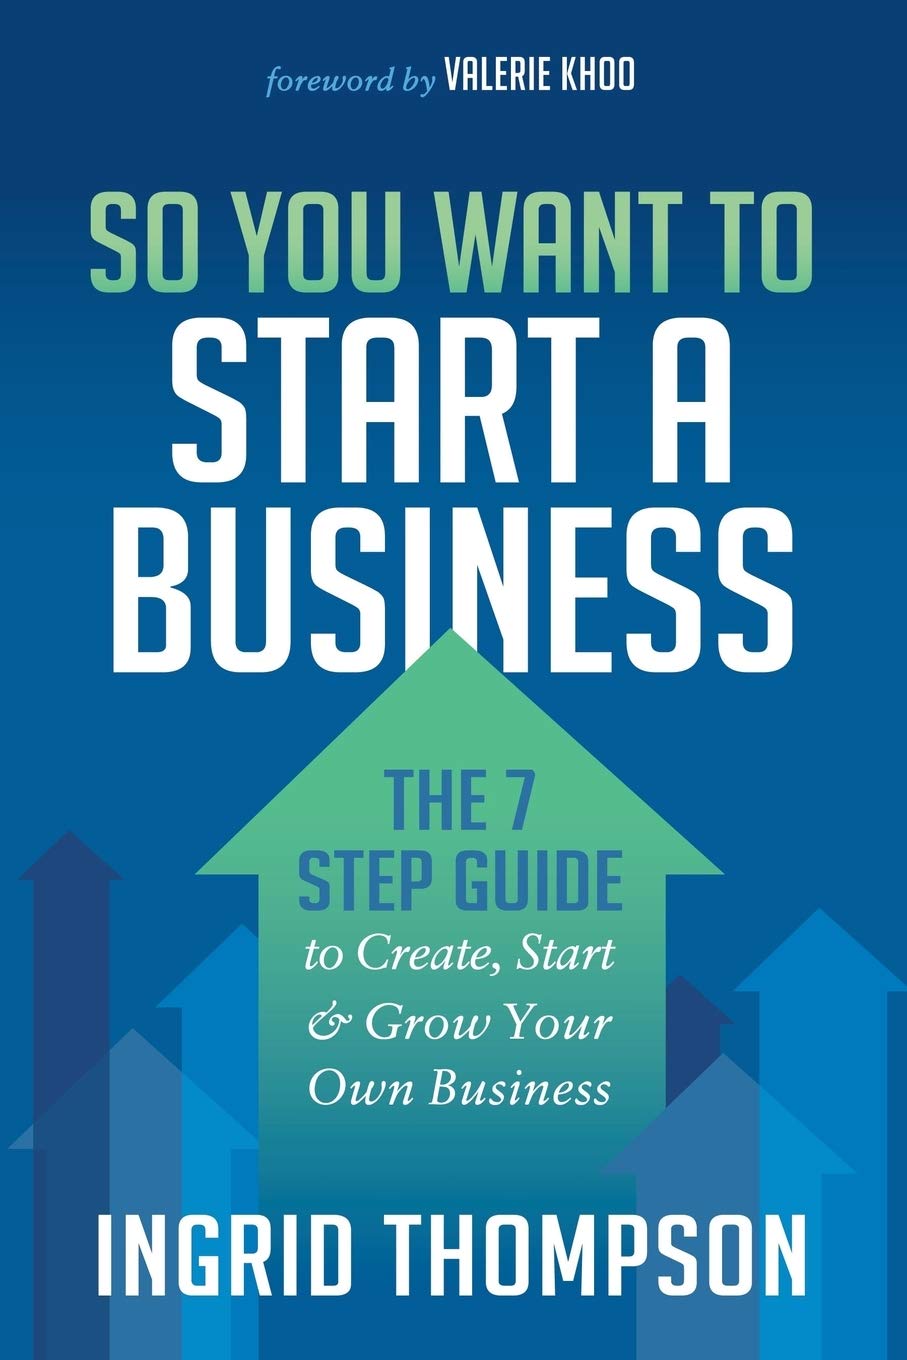 So You Want to Start a Business The 7 Step Guide to Create, Start and Grow Your Own Business - SureShot Books